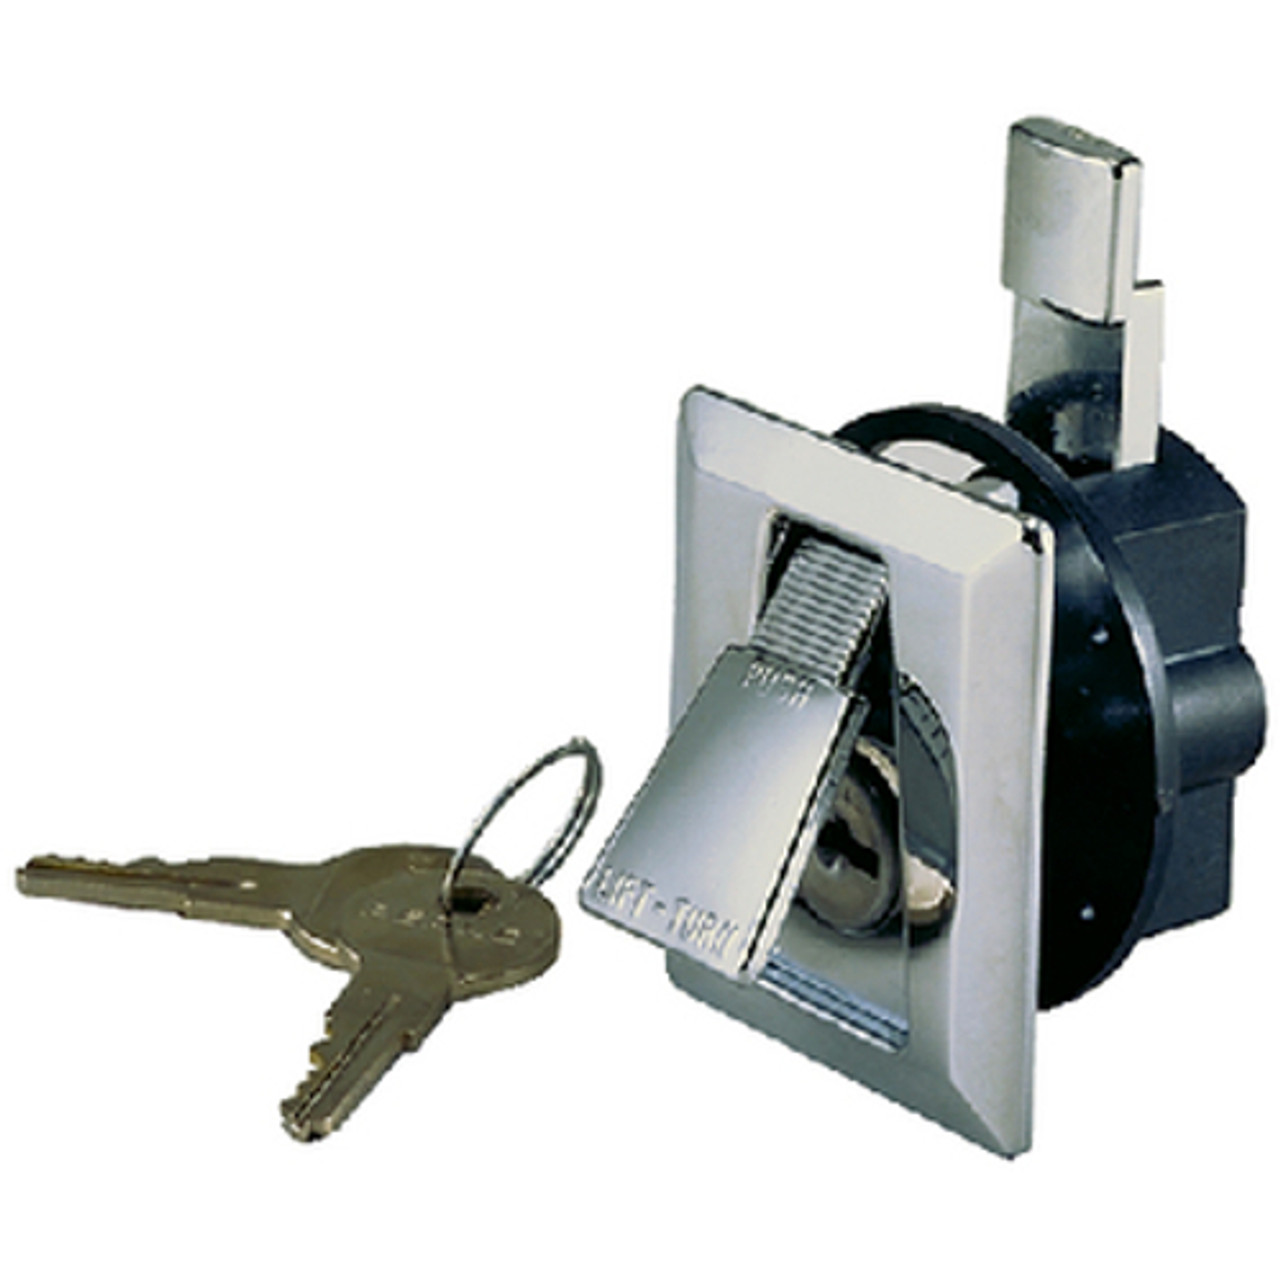 Chrome Plated Zinc Flush Mounted Locking Latch for Boats, RVs and More